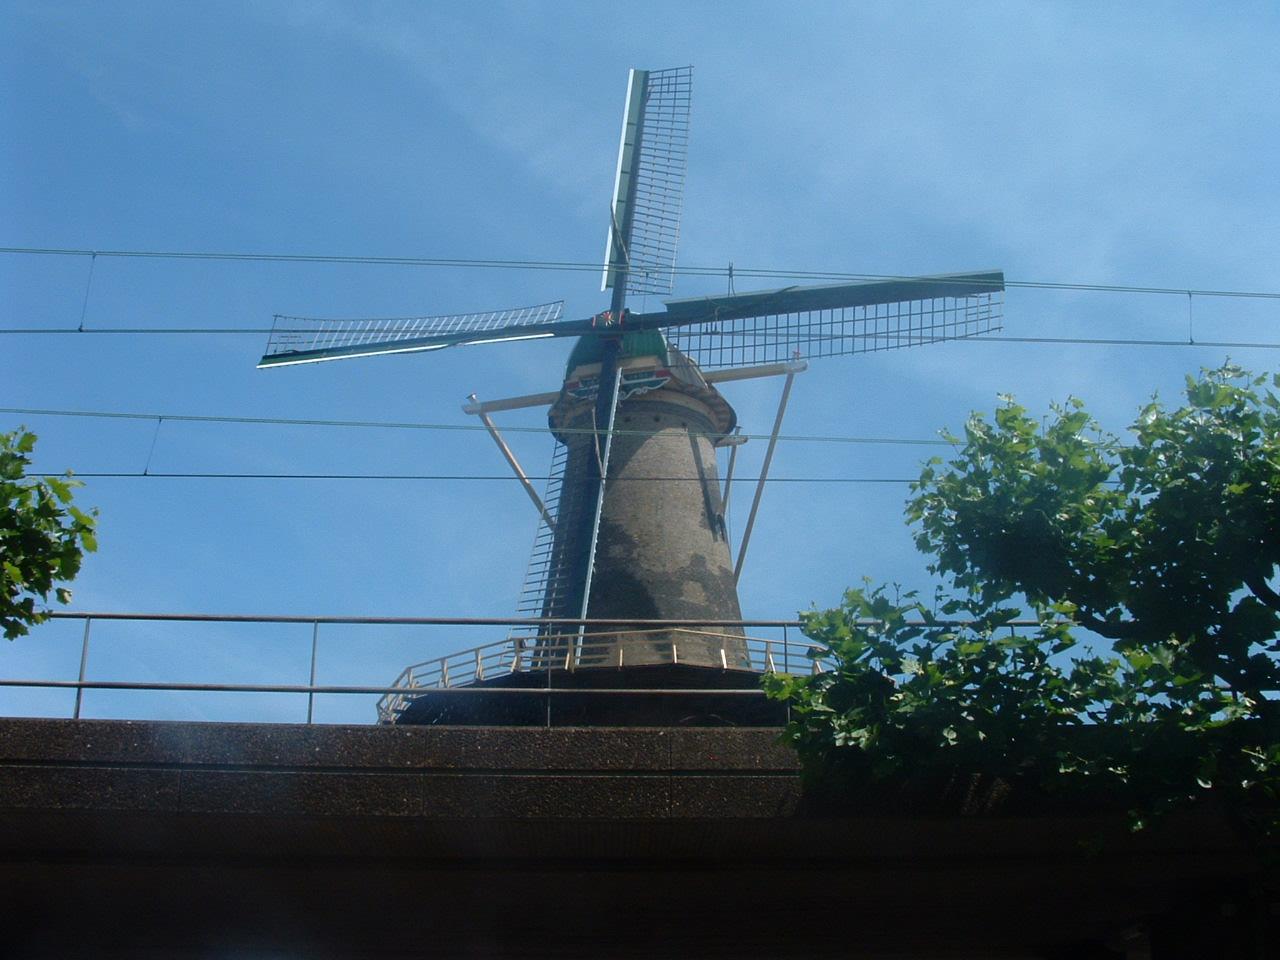 The Netherlands - Delft Windmill #3